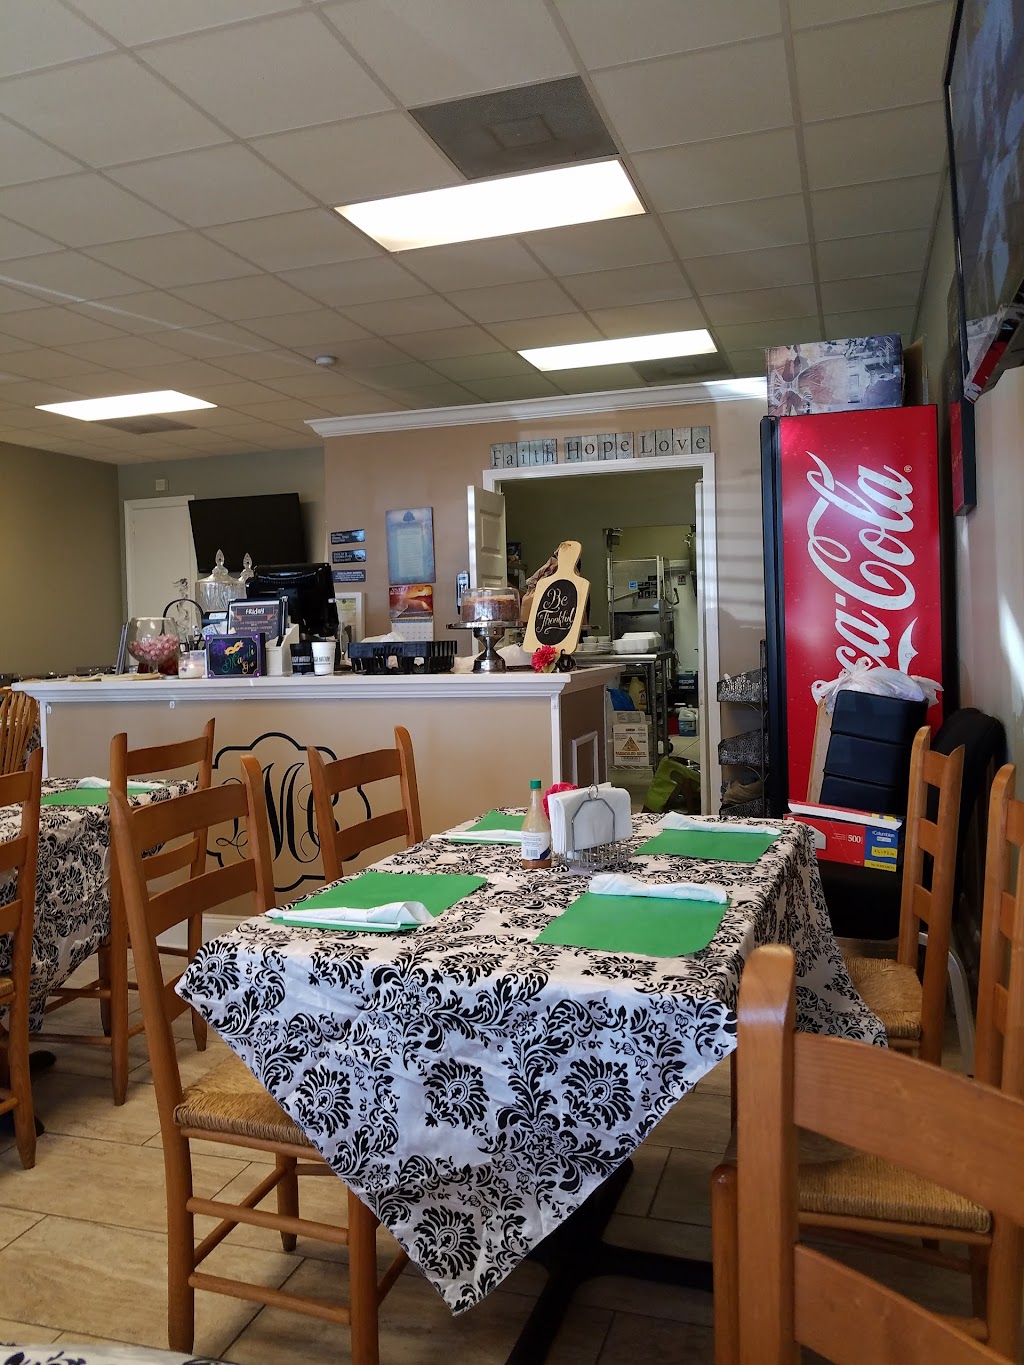 Minnies Daughter Catering and Cafe - restaurant  | Photo 1 of 10 | Address: 3991 Pontchartrain Dr, Slidell, LA 70458, USA | Phone: (985) 326-8189